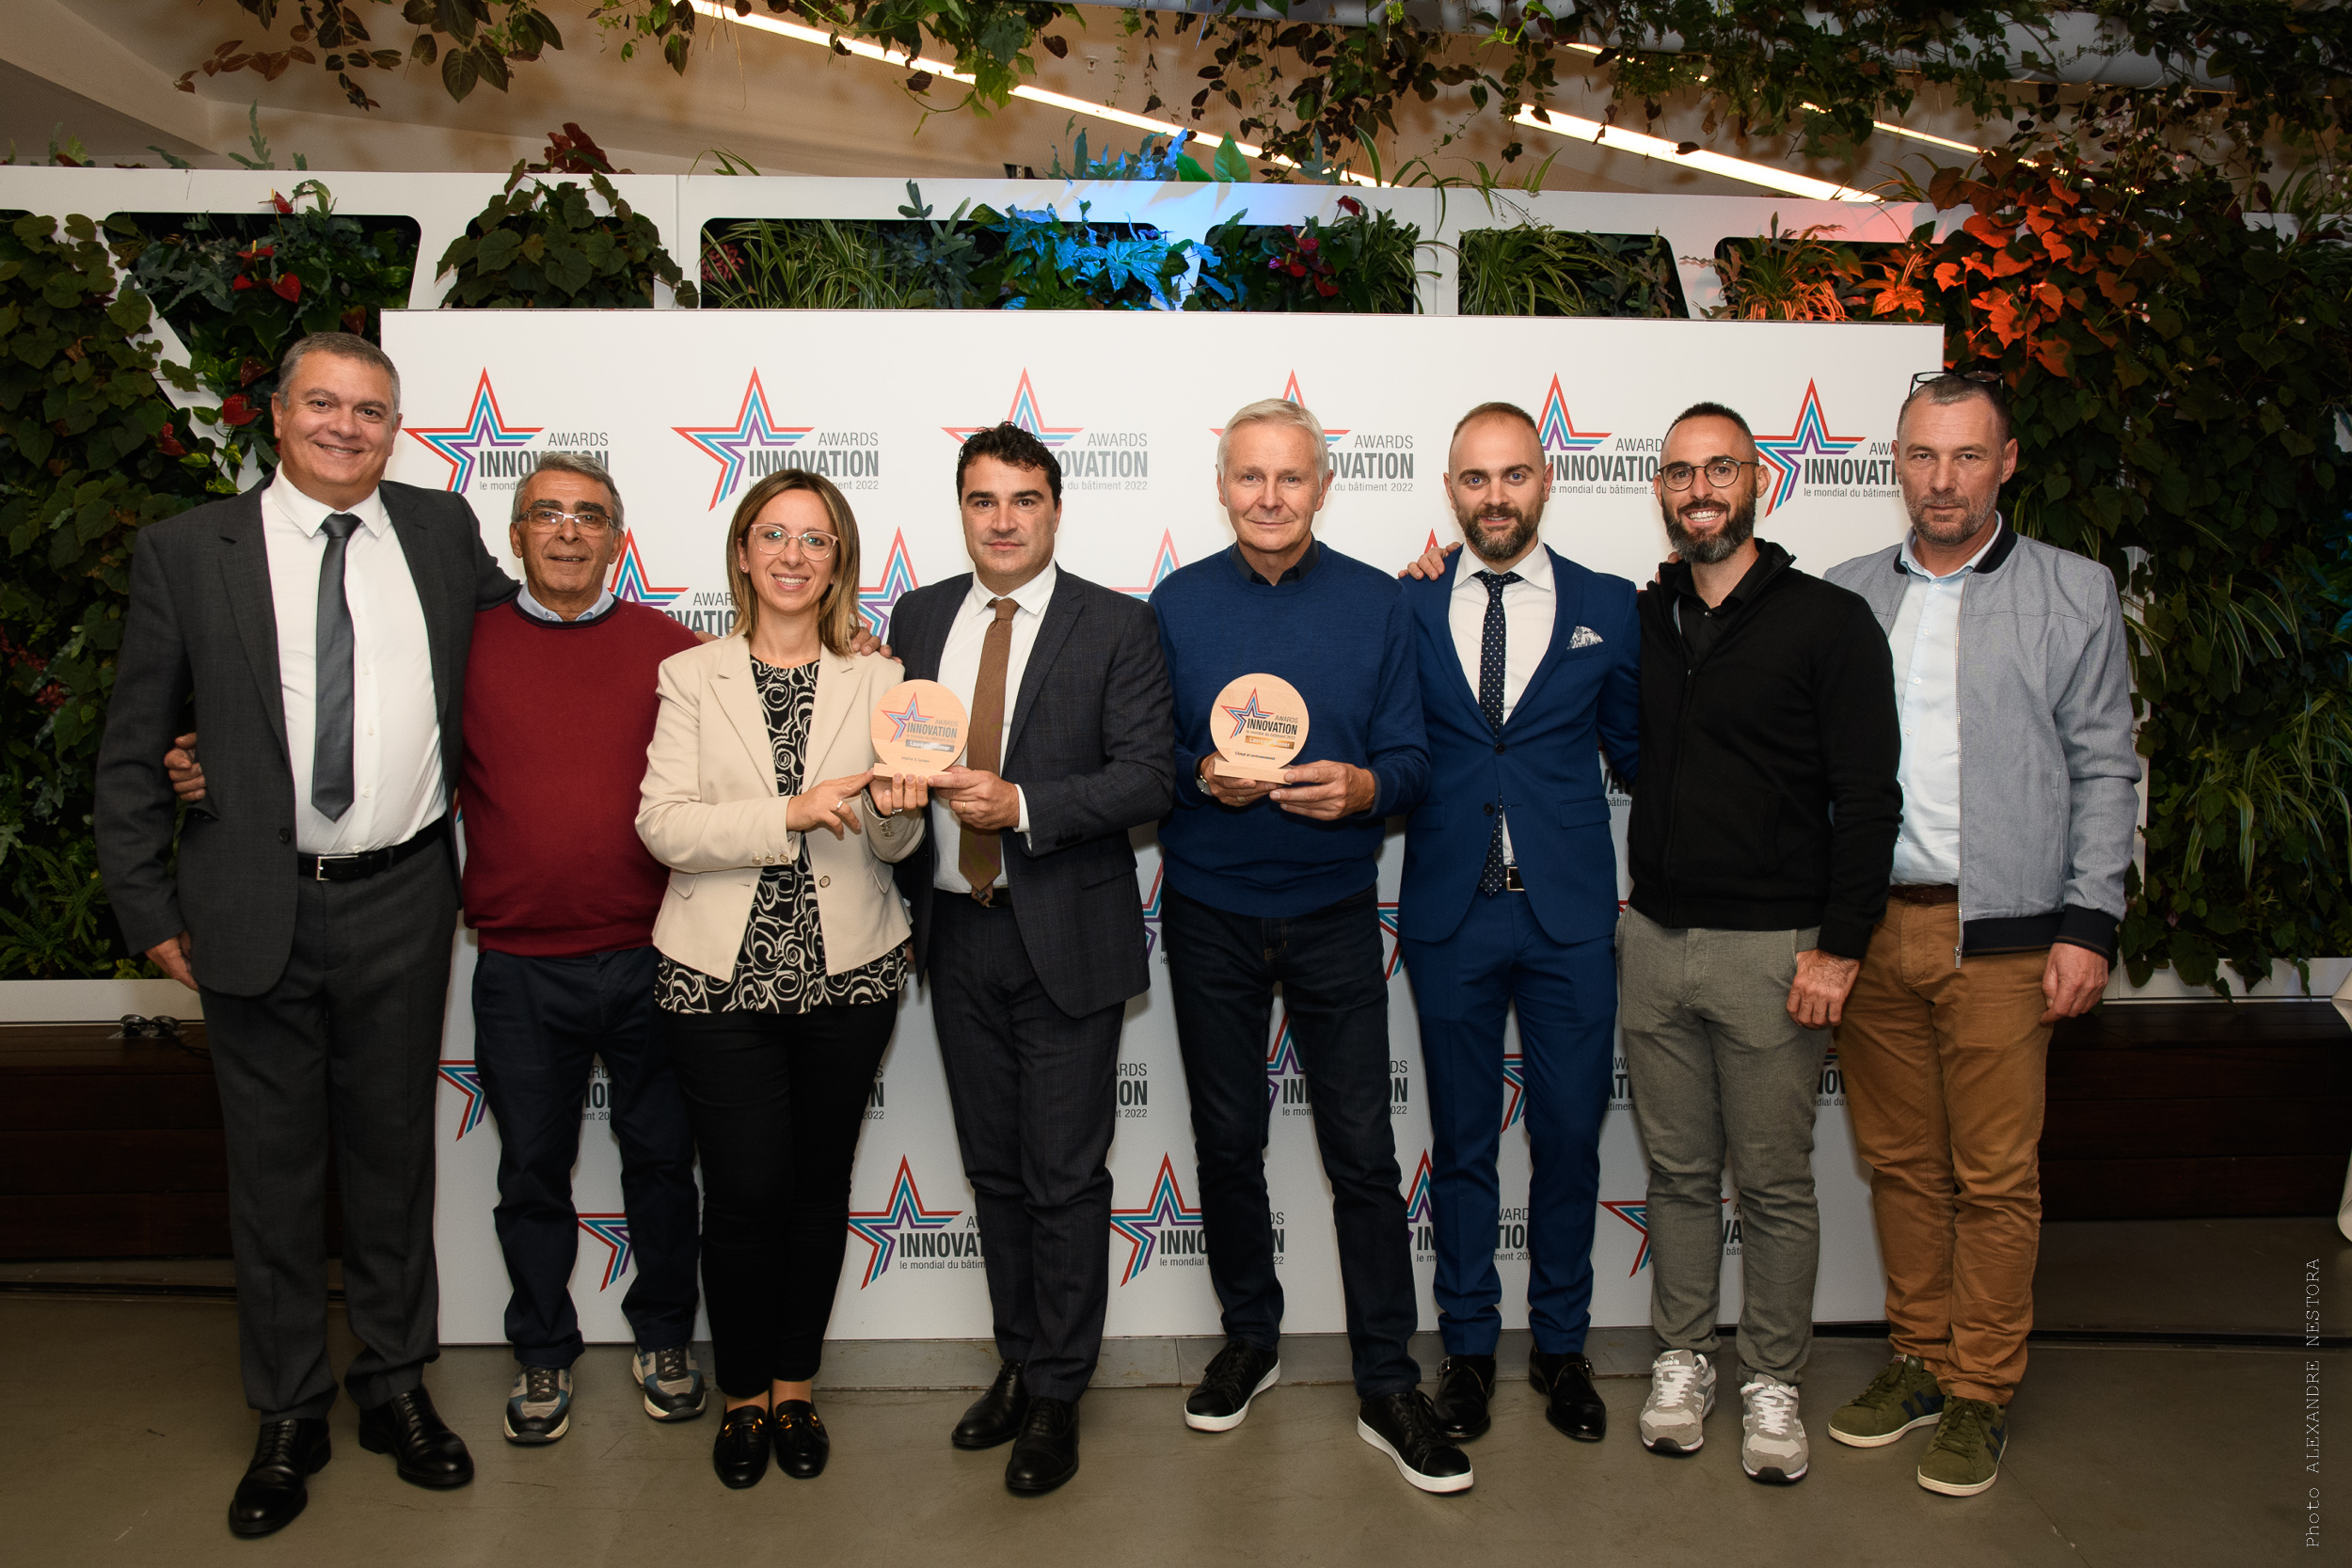 DIASEN STARRING IN PARIS. DOUBLE AWARD AT BATIMAT FOR THE COMPANY LED BY DIEGO MINGARELLI, AWARDED BY A JURY OF SPECIALISTS FOR CLIMATE AND ENVIRONMENTAL PROTECTION SOLUTIONS.